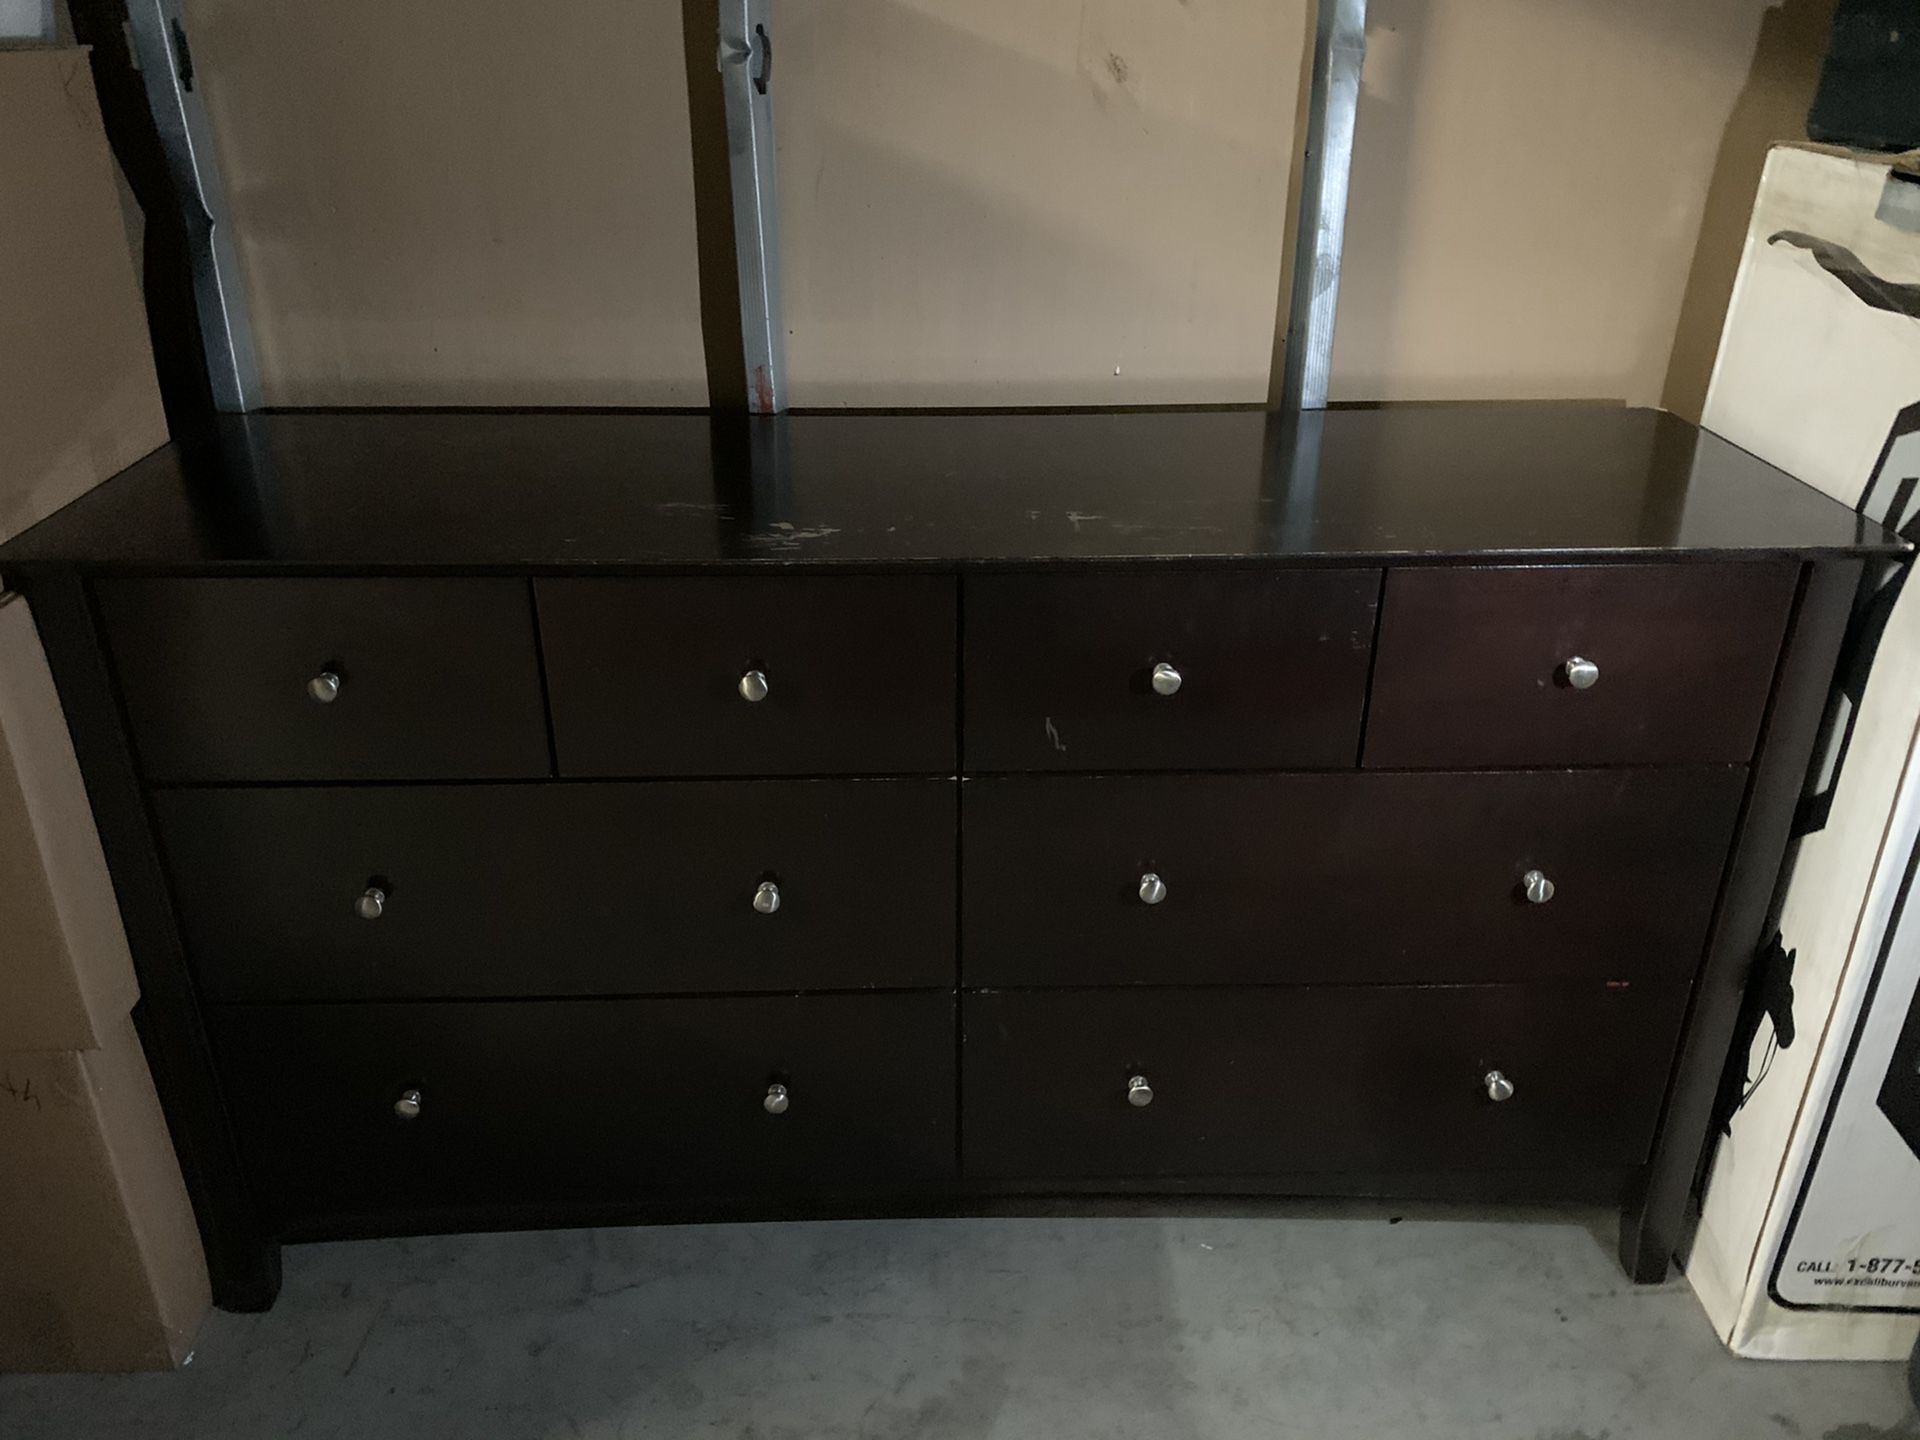 2 Dressers and 2 nightstands - Need to Sell in 2 Days!